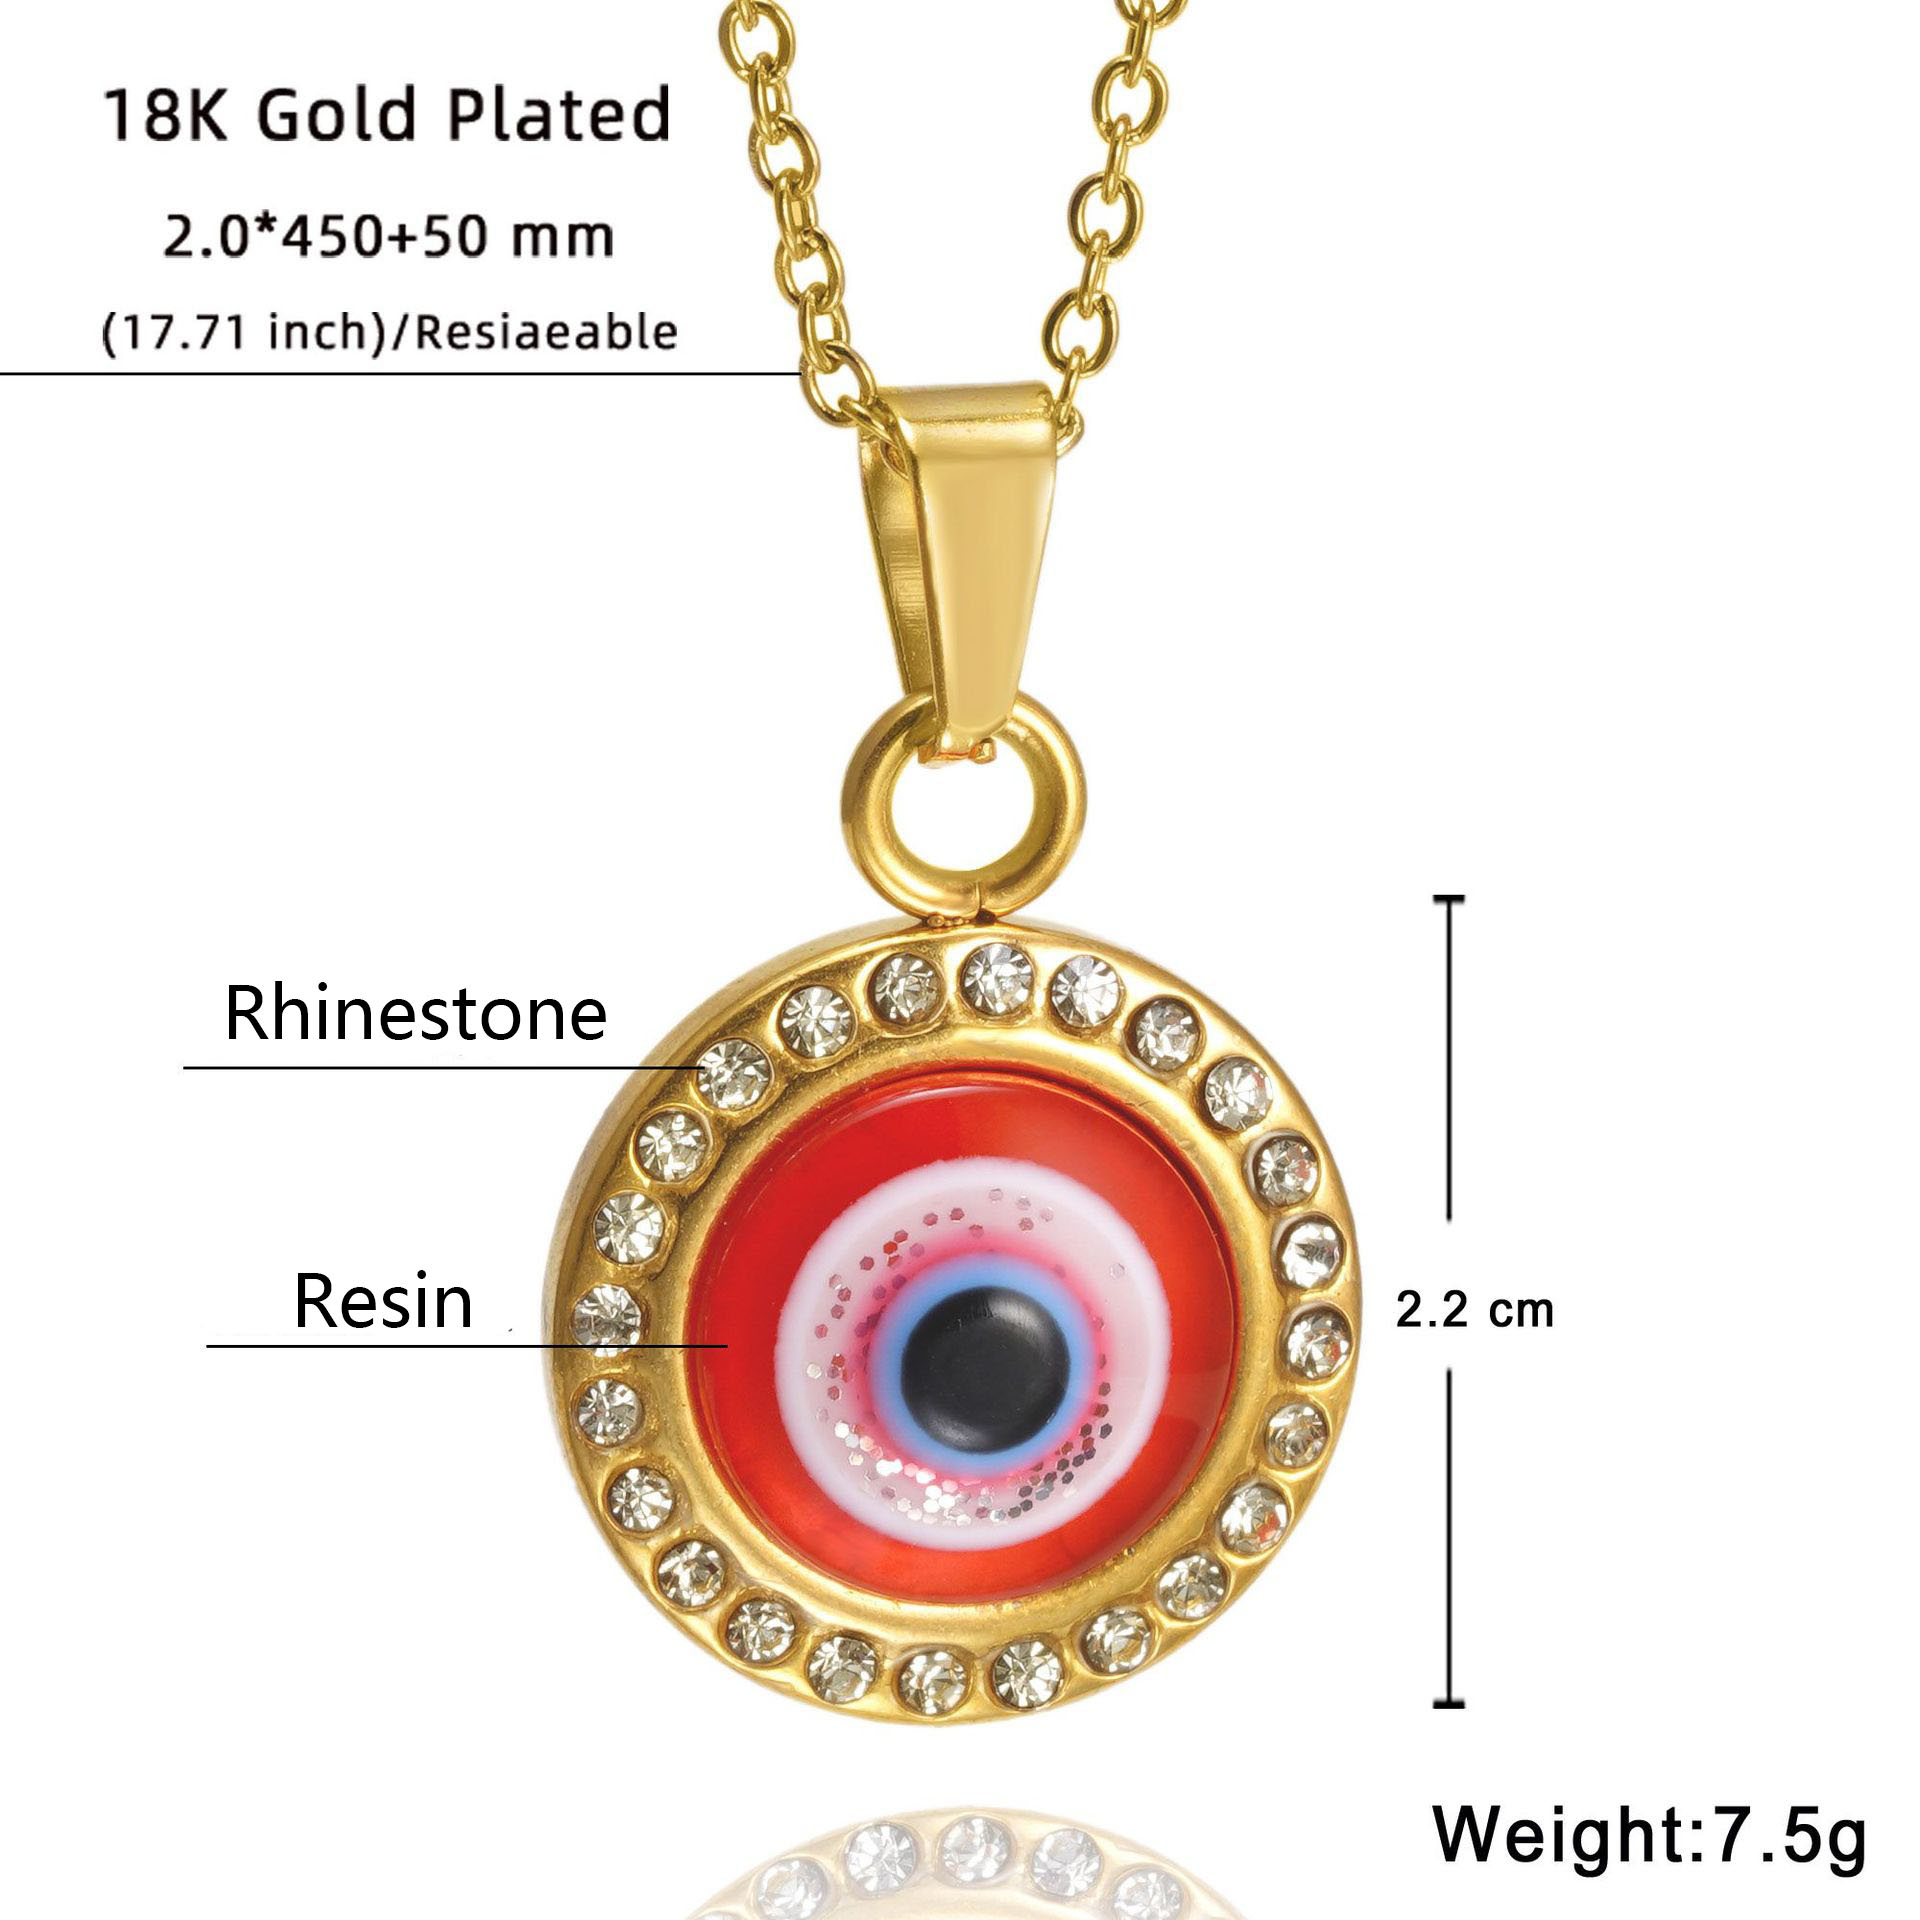 1:Gold red eye necklace